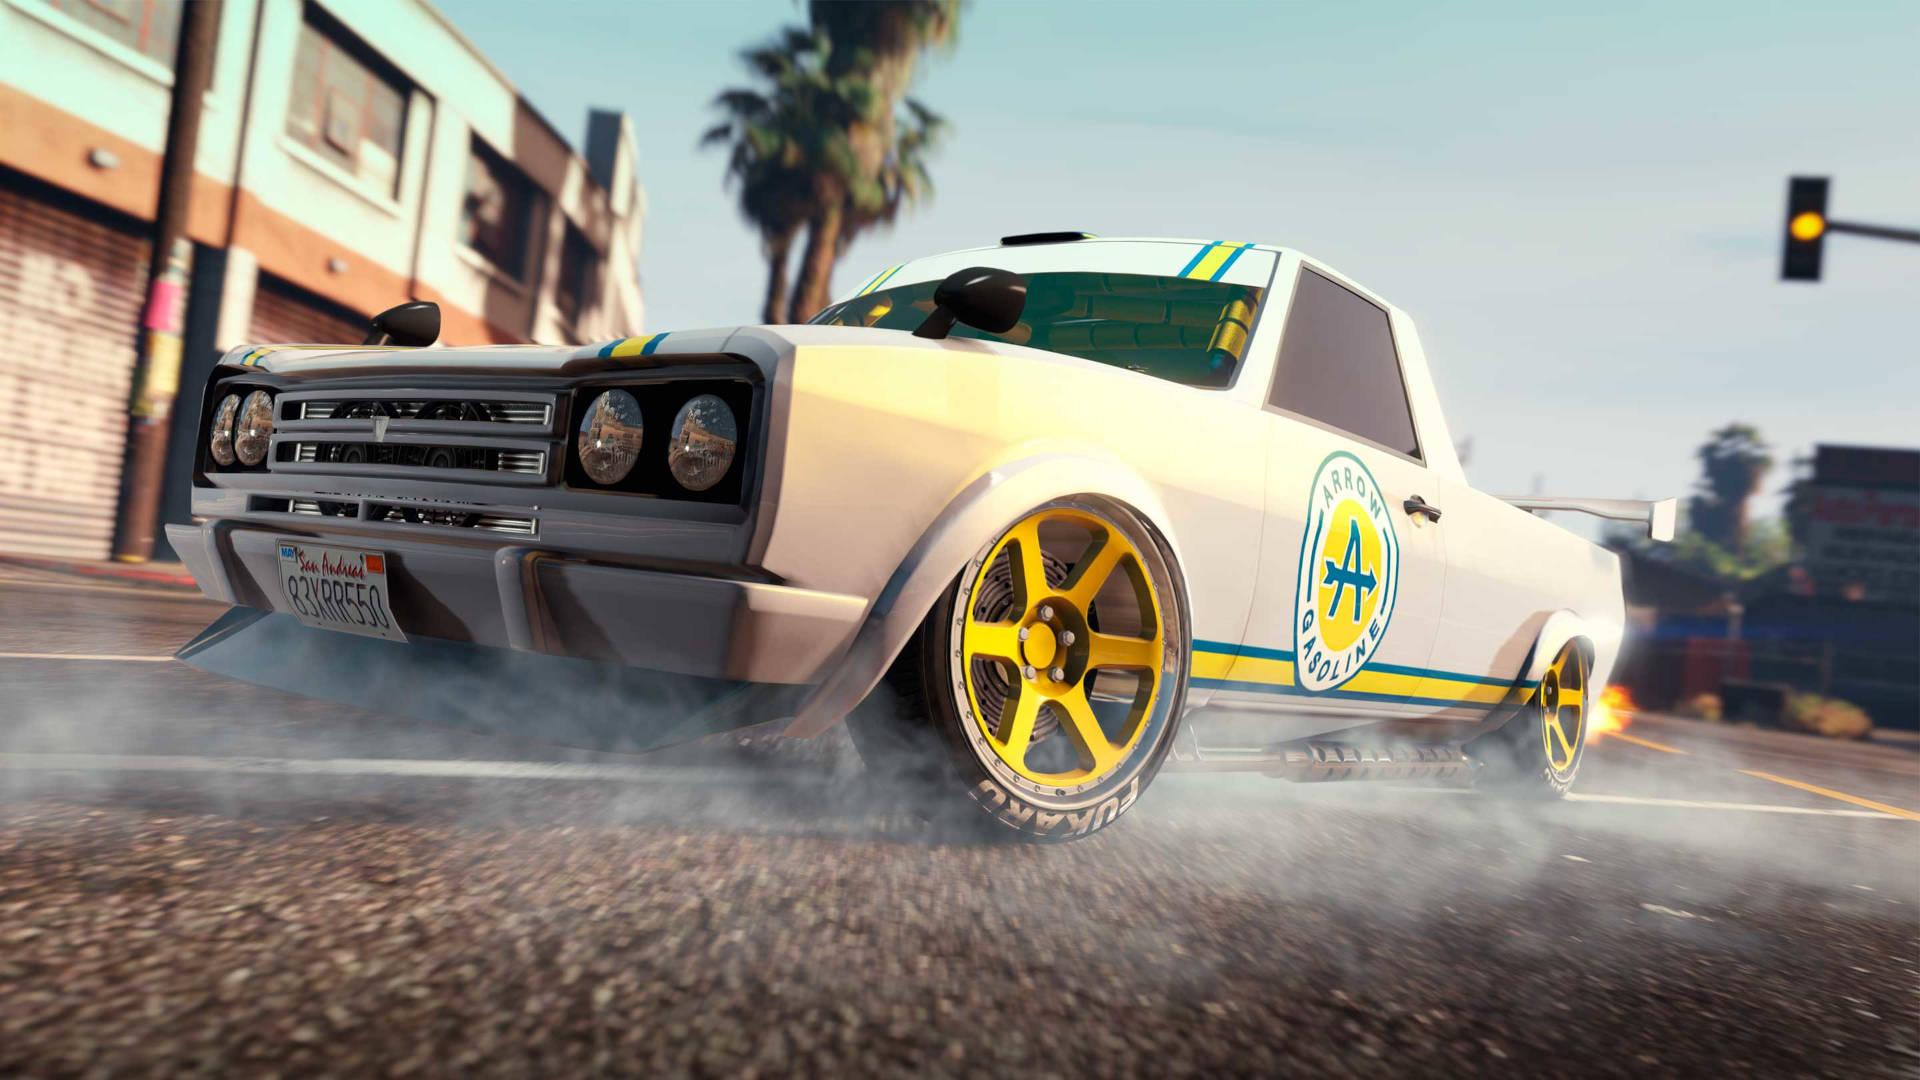 Los Santos Tuners update for Grand Theft Auto V